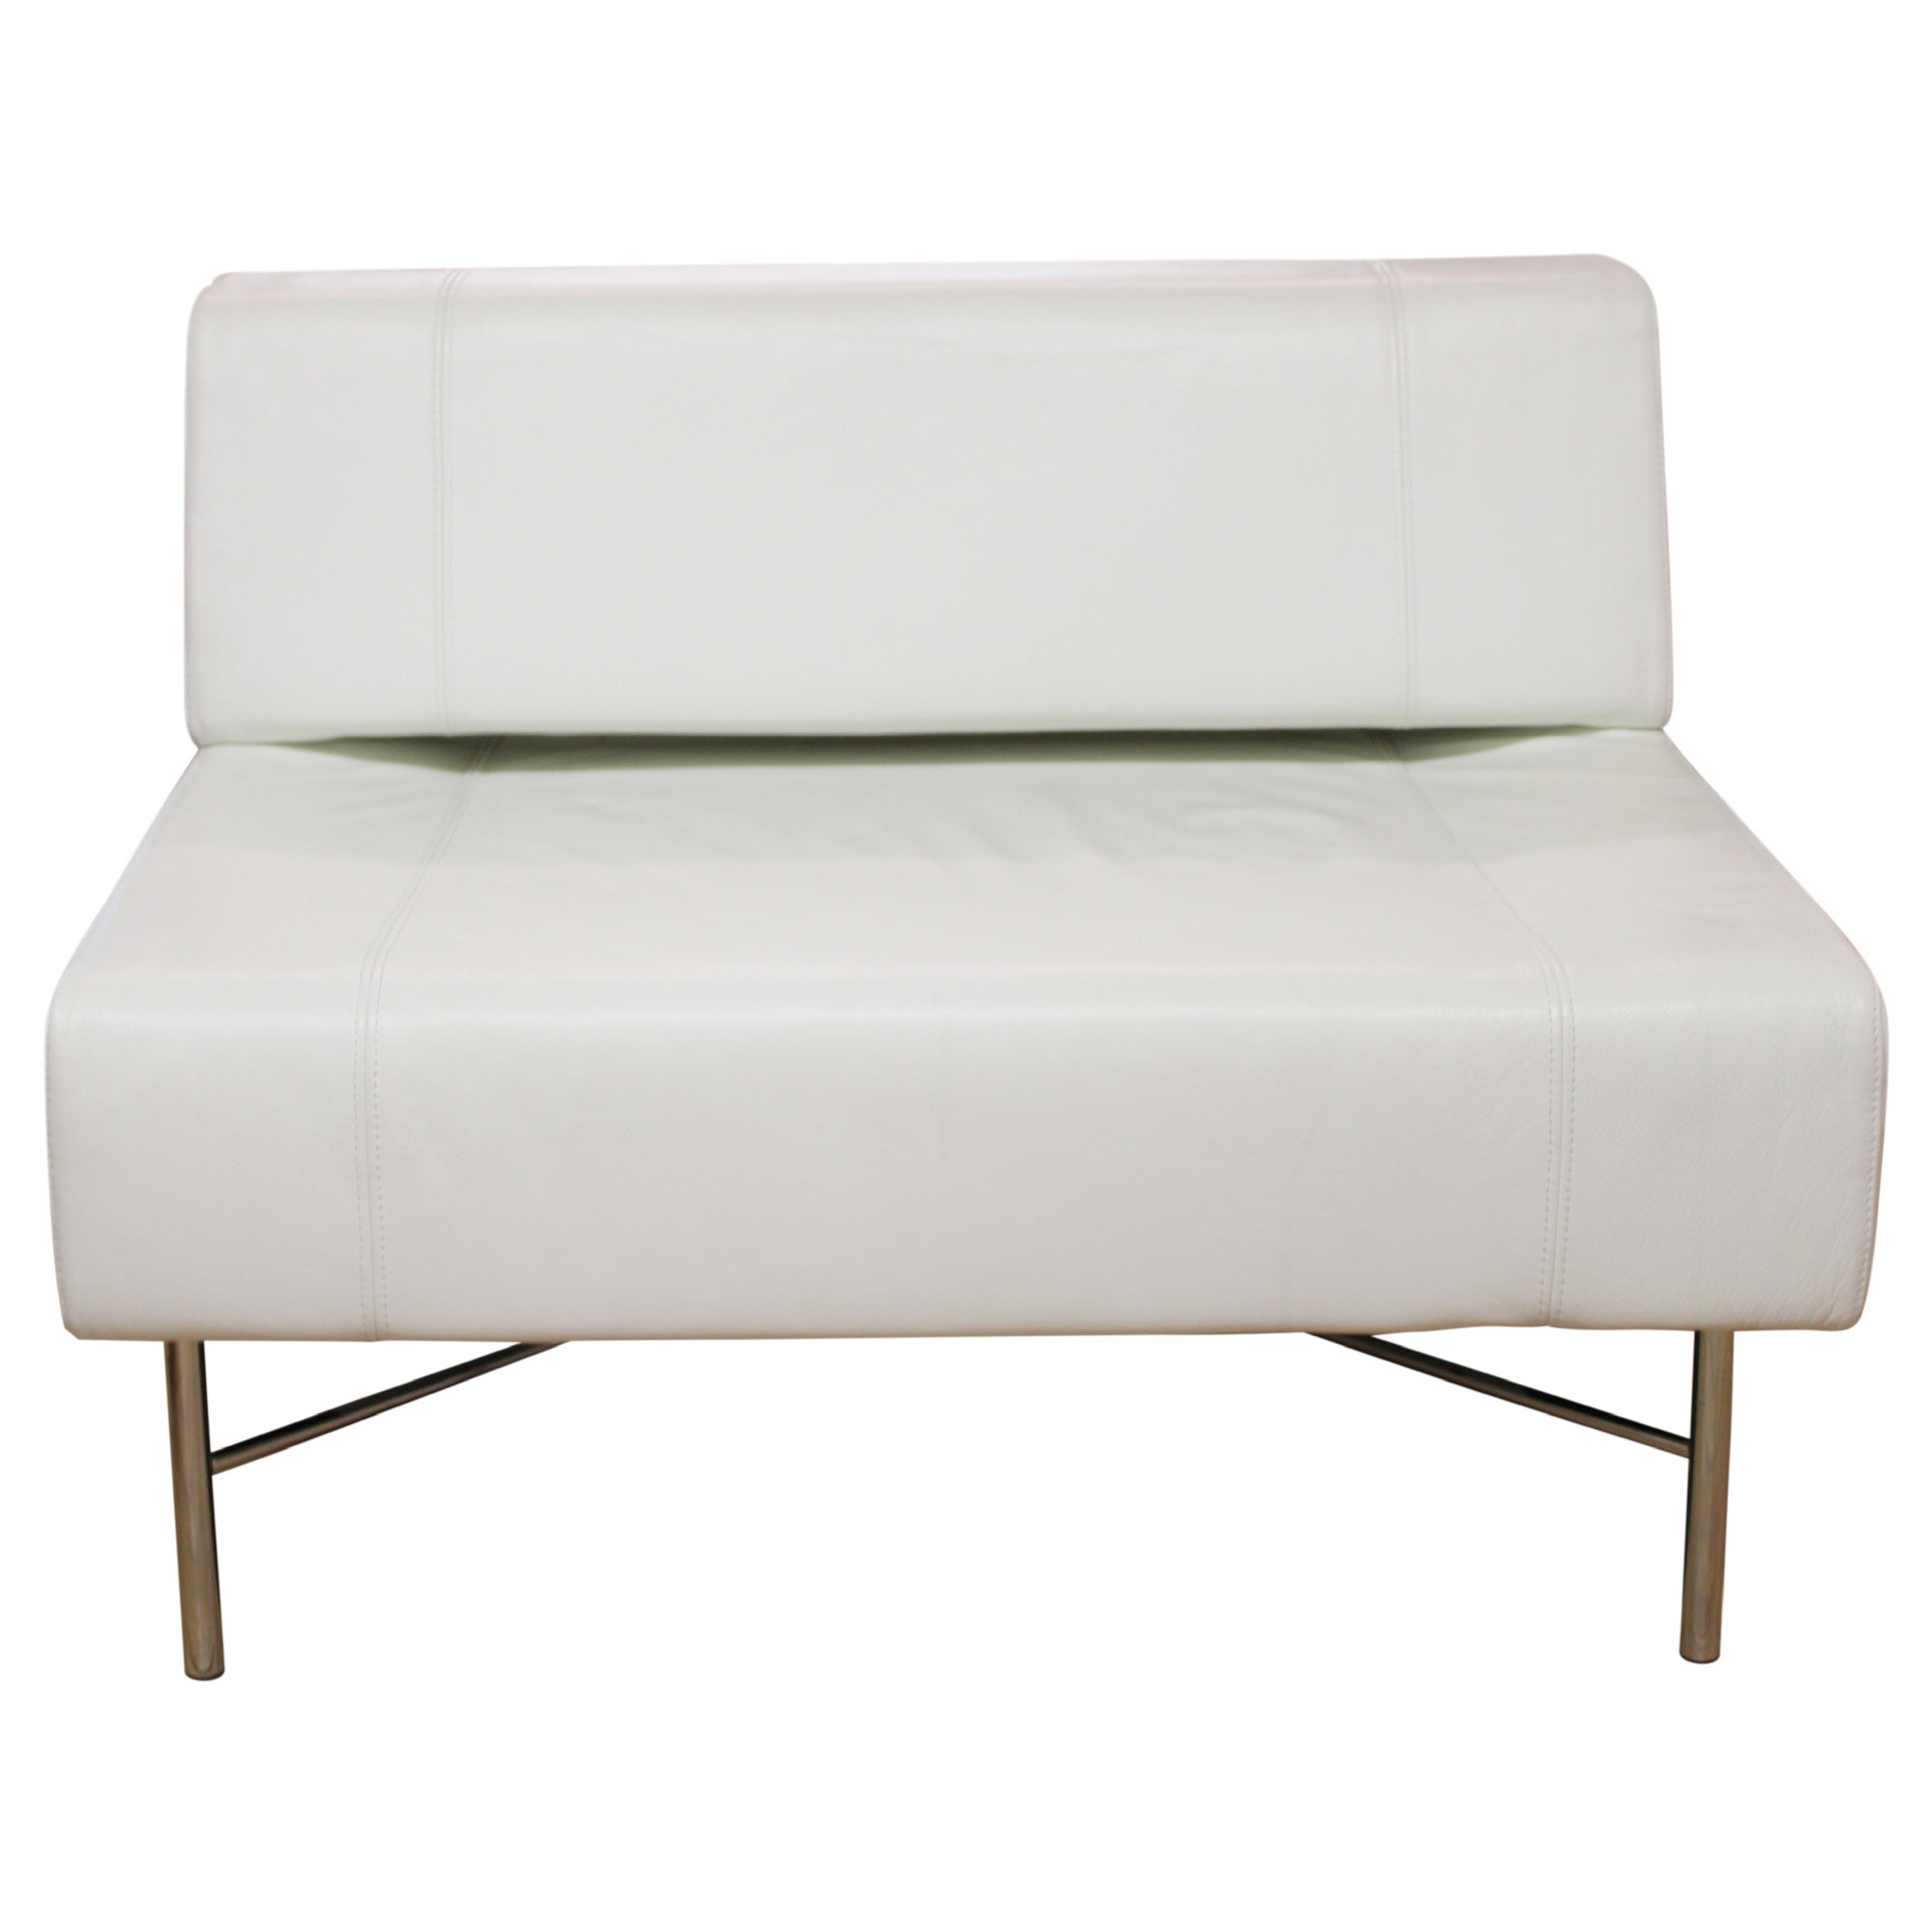 Boxcar Lounge Chair by Keilhauer - White - Preowned